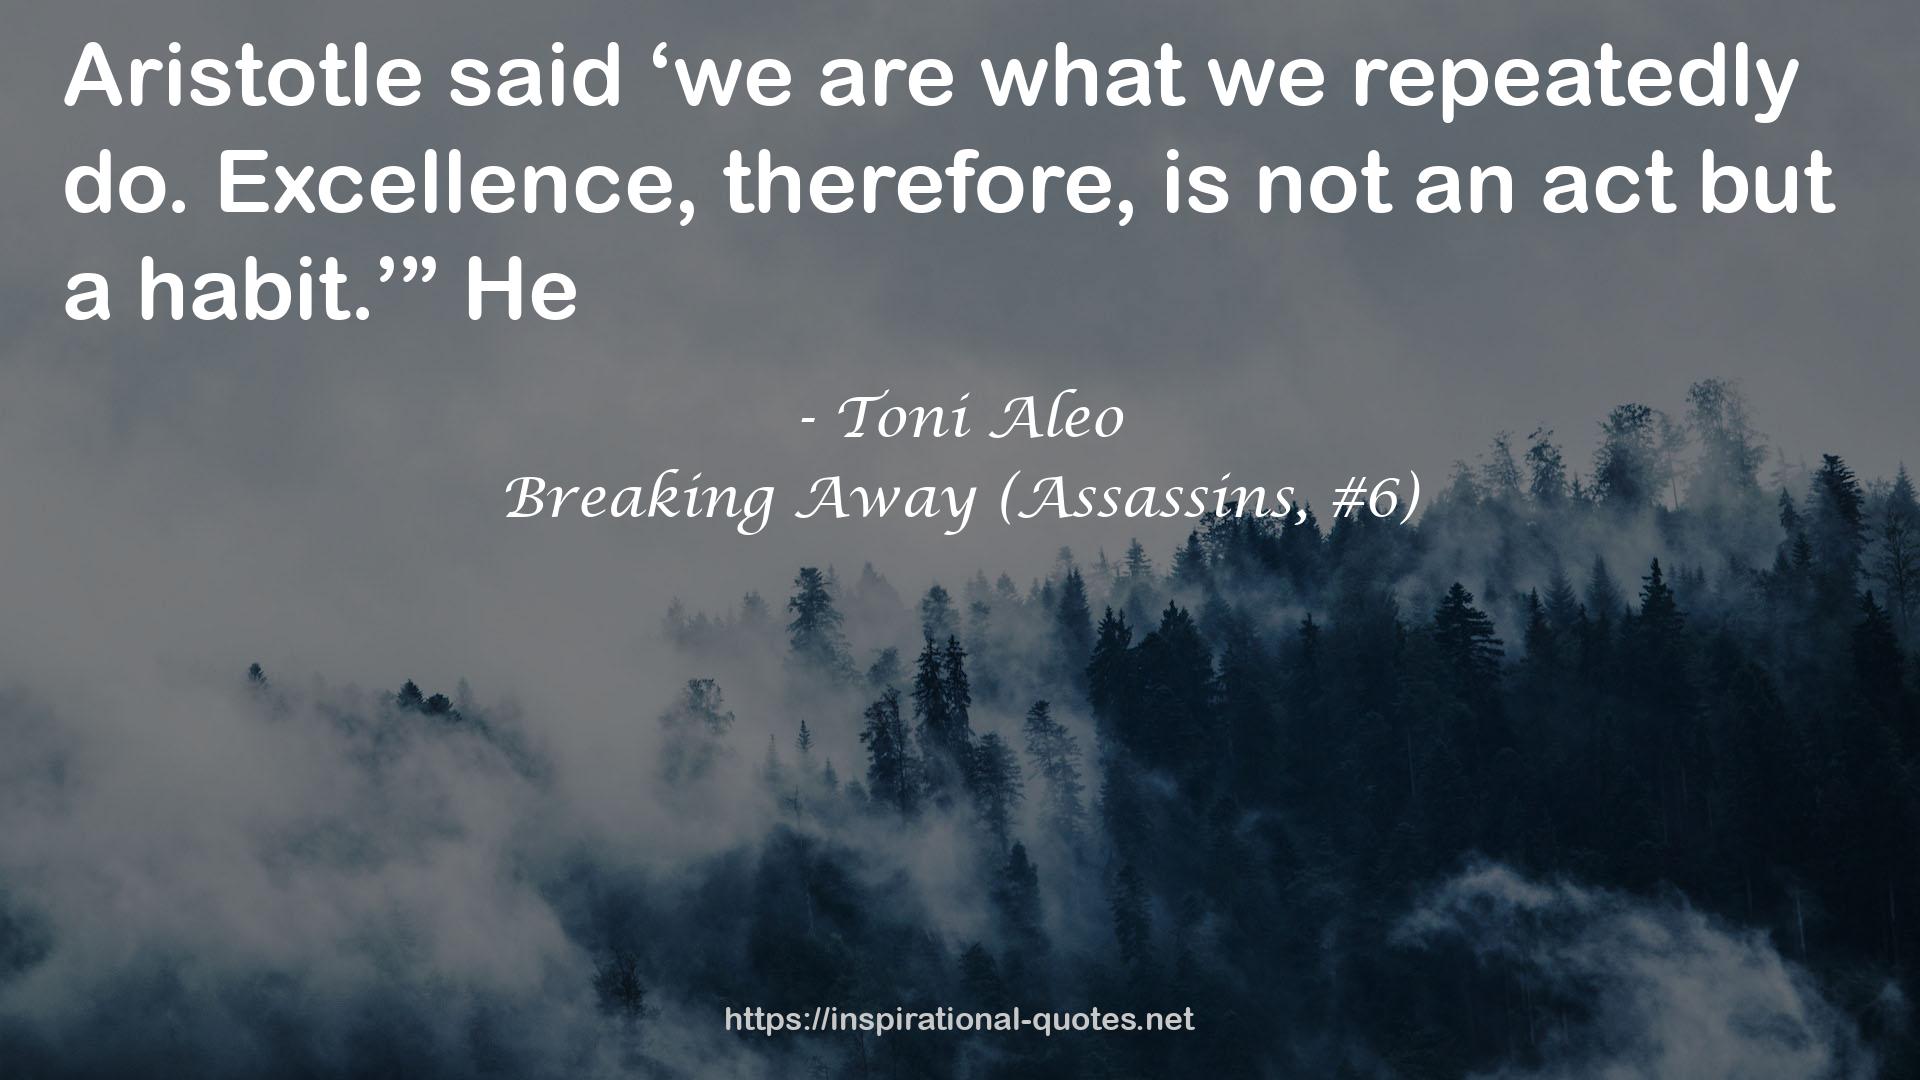 Breaking Away (Assassins, #6) QUOTES